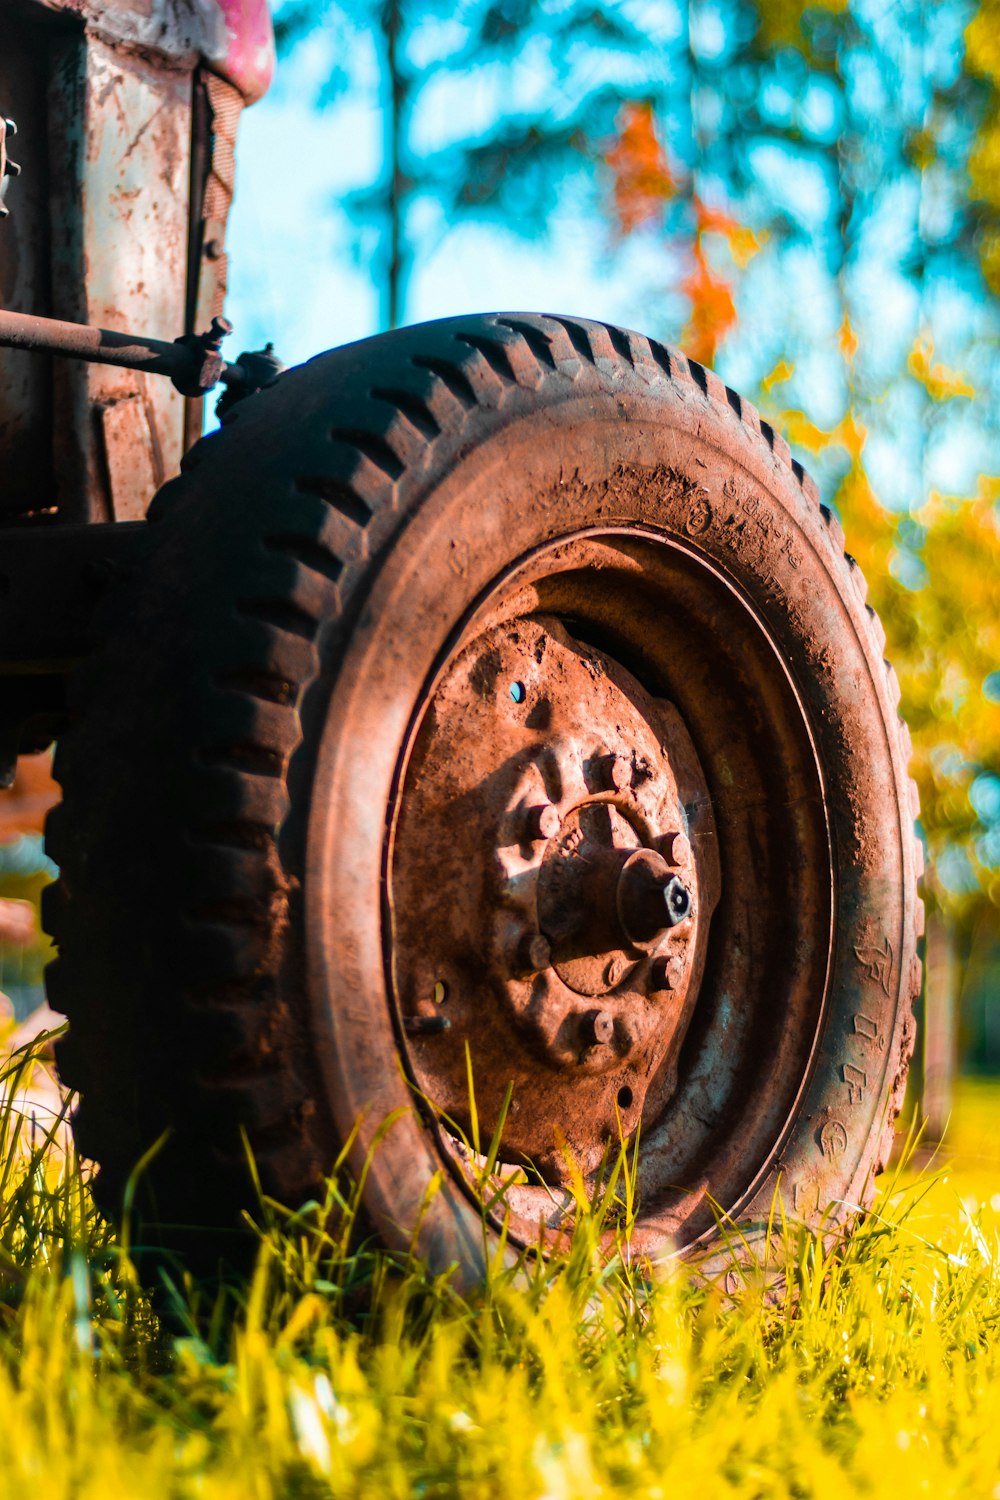 brown tractor on grass field during day photo – Free Tire Image on Unsplash